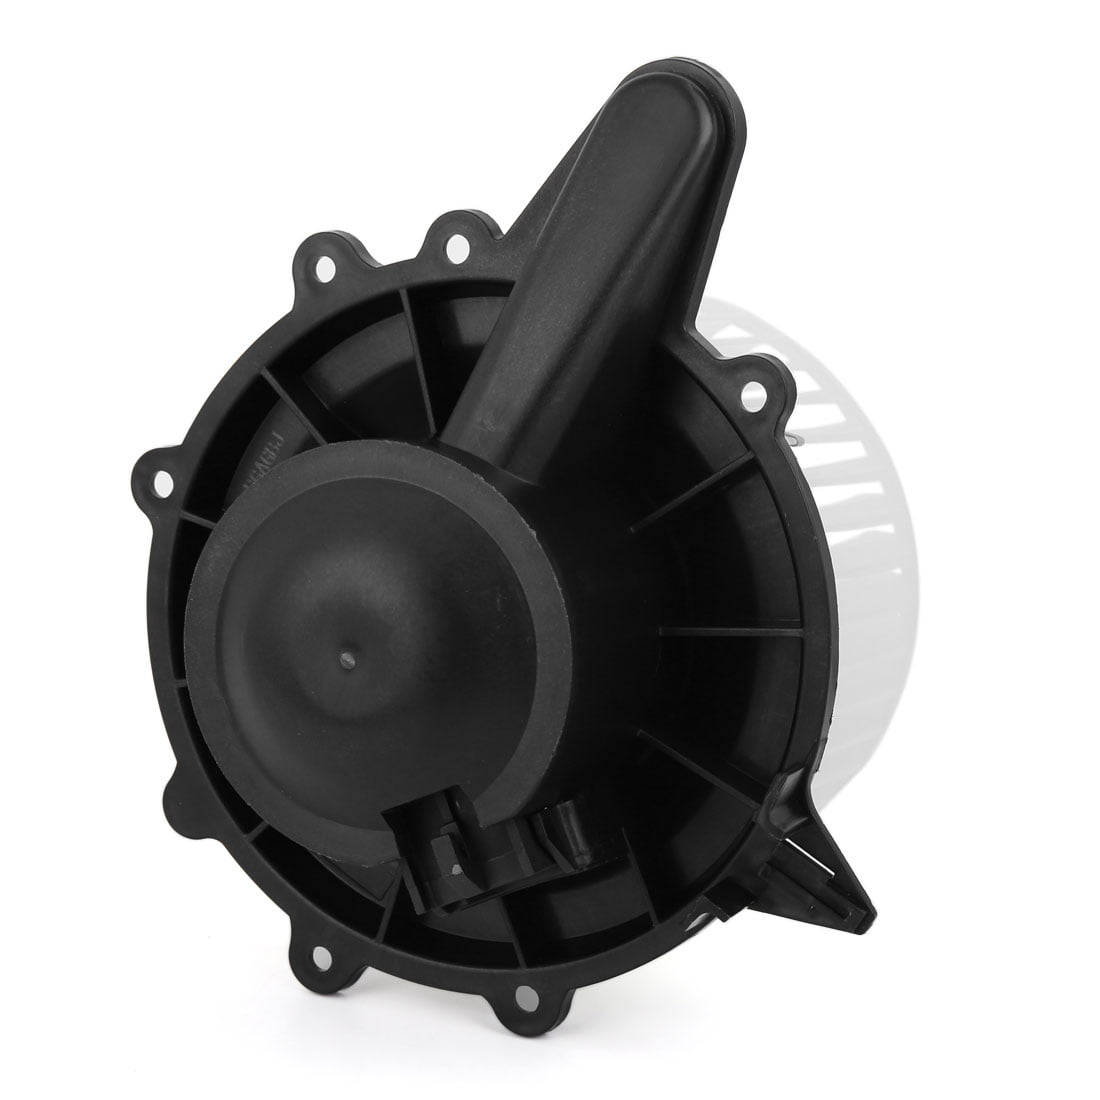 Heater Blower Motor with fan Cage For Ford F150 Expedition Lincoln Navigator